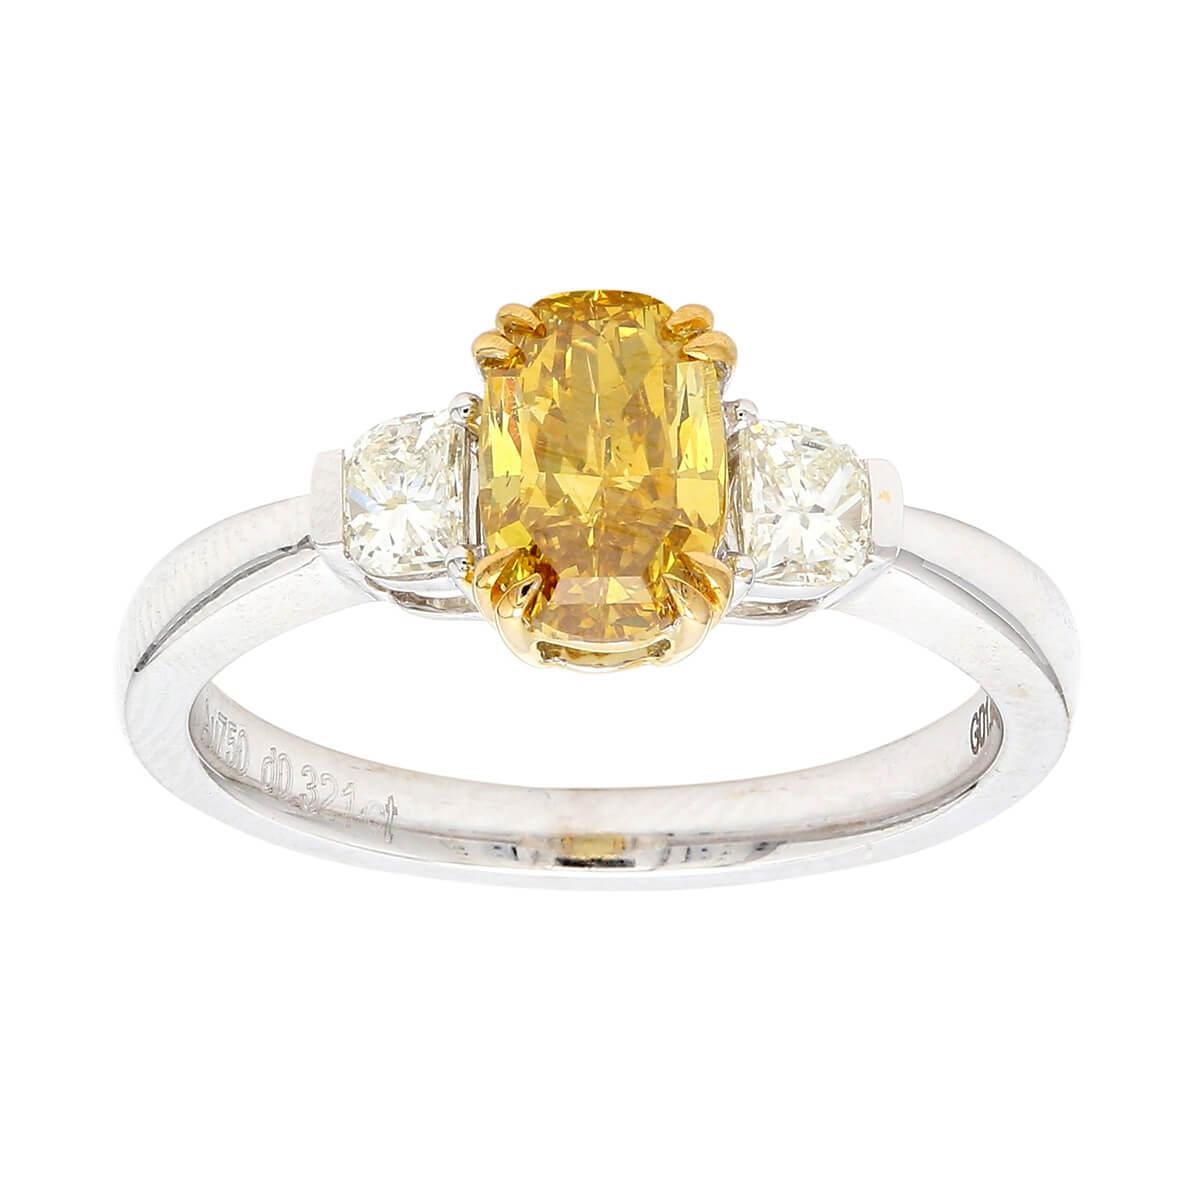 This elegant cocktail ring consists of a main stone which is a 1.05 Fancy Deep Orangy Yellow Diamond, surrounded by White Diamonds together makes up a total of 1.37 Carats and is expertly made using 18 Karat White Gold. The Diamond are natural and